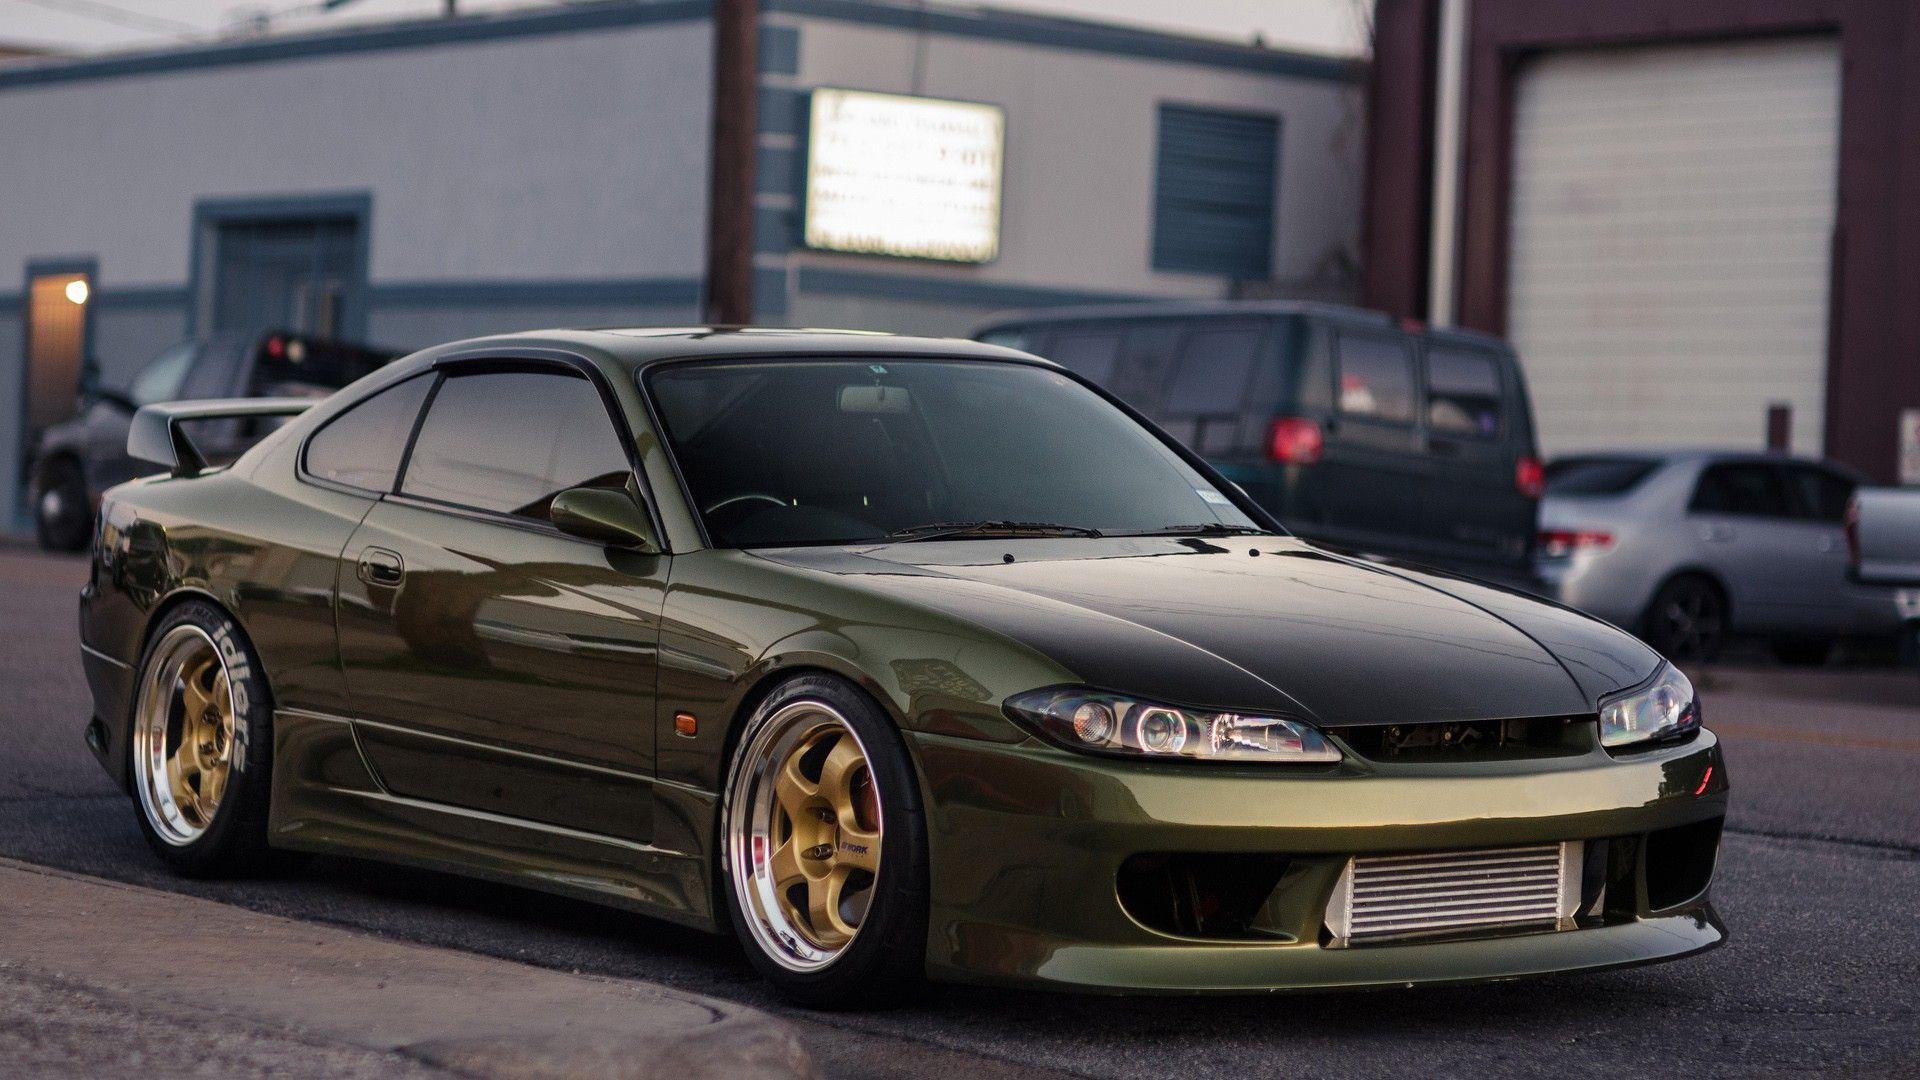 20 Stunning Nissan Silvia S15 Wallpapers Wallpaper Box | Images and ...